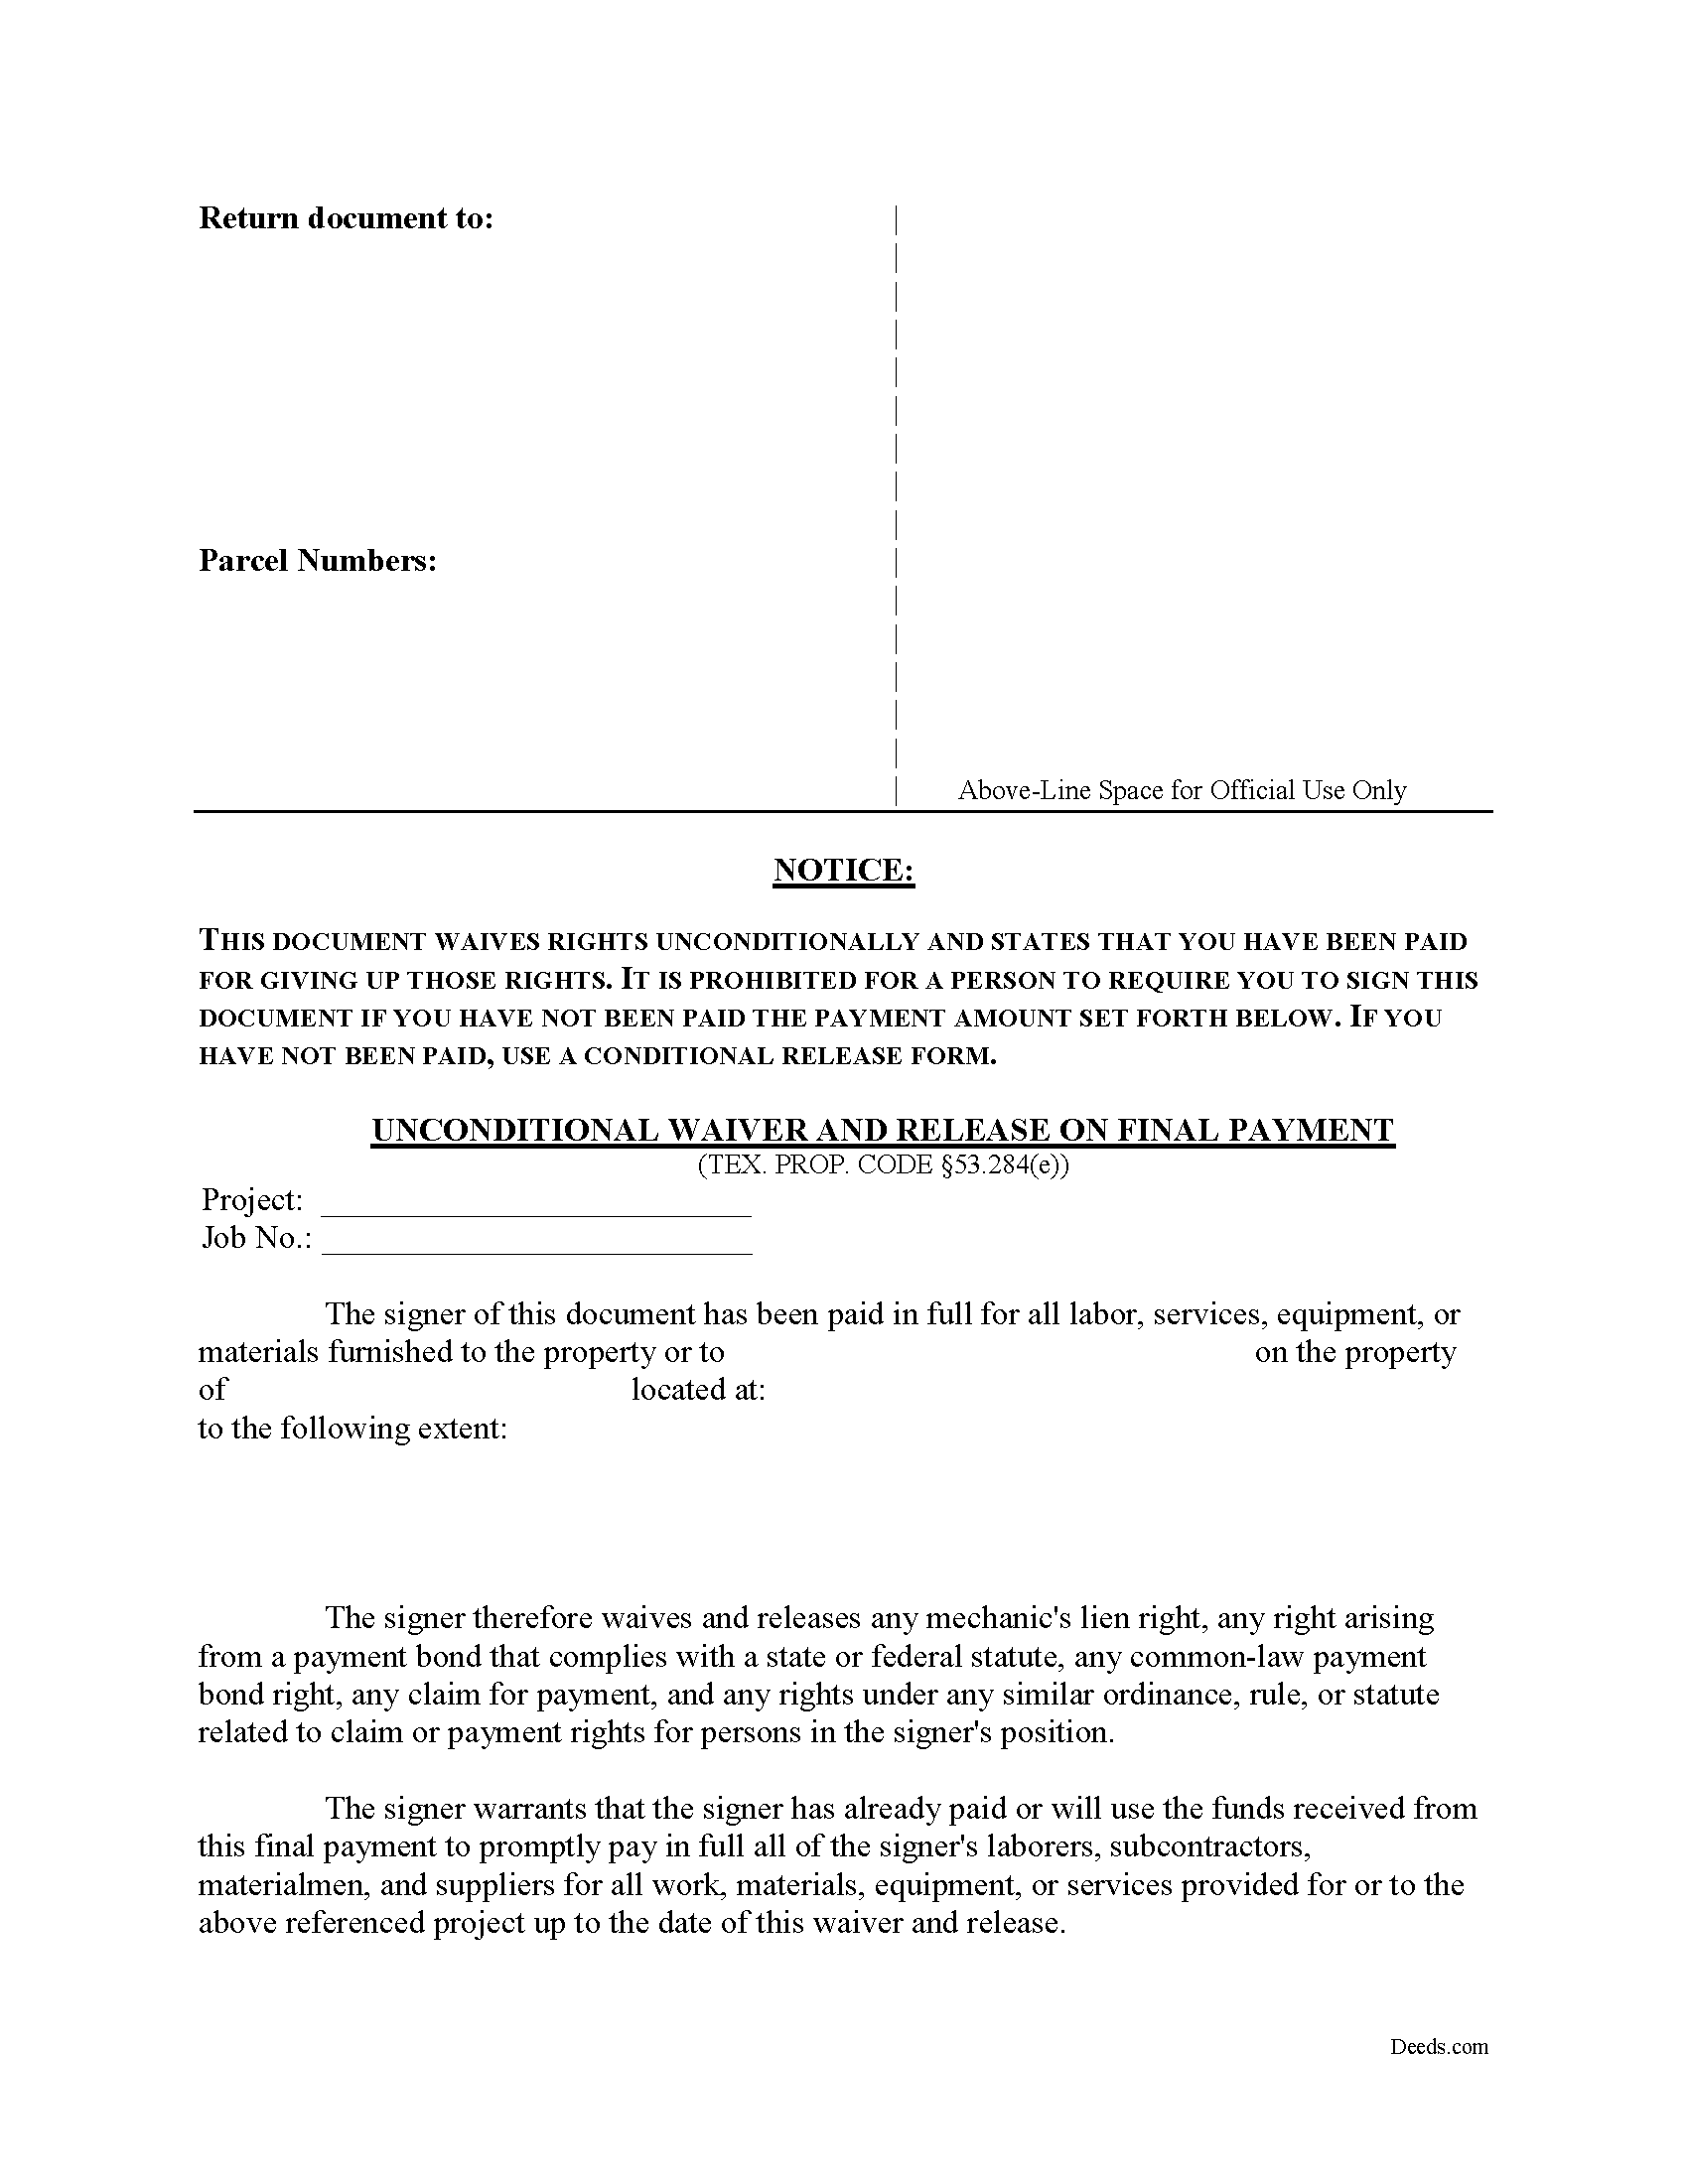 Texas Unconditional Waiver on Final Payment Image